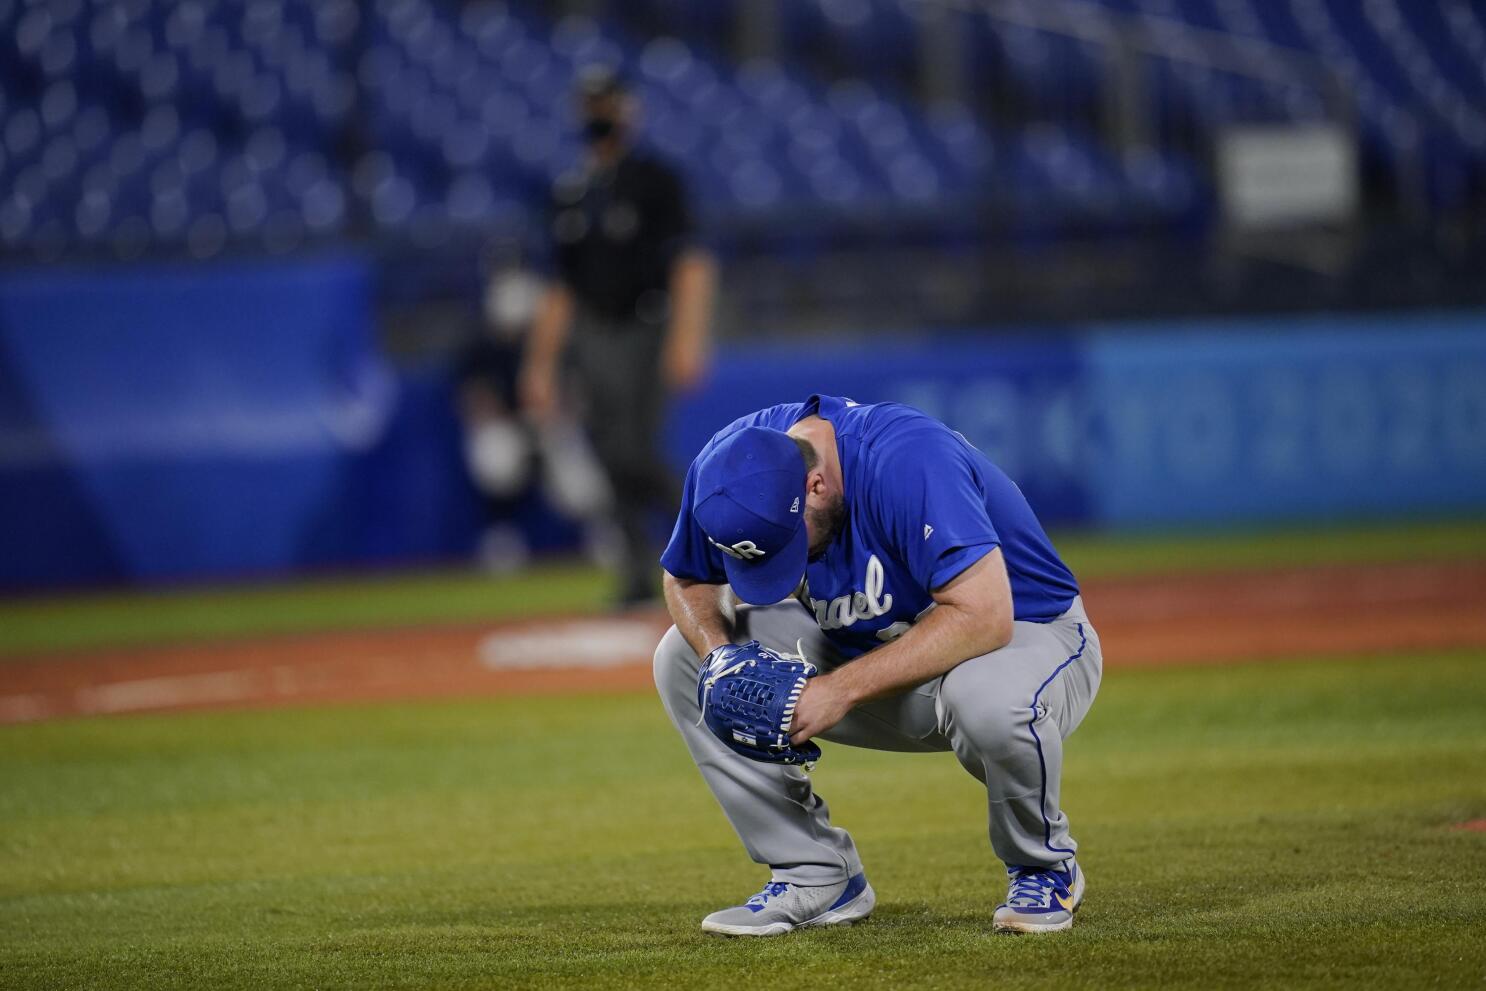 Hit batters lift South Korea over Israel in Olympic baseball